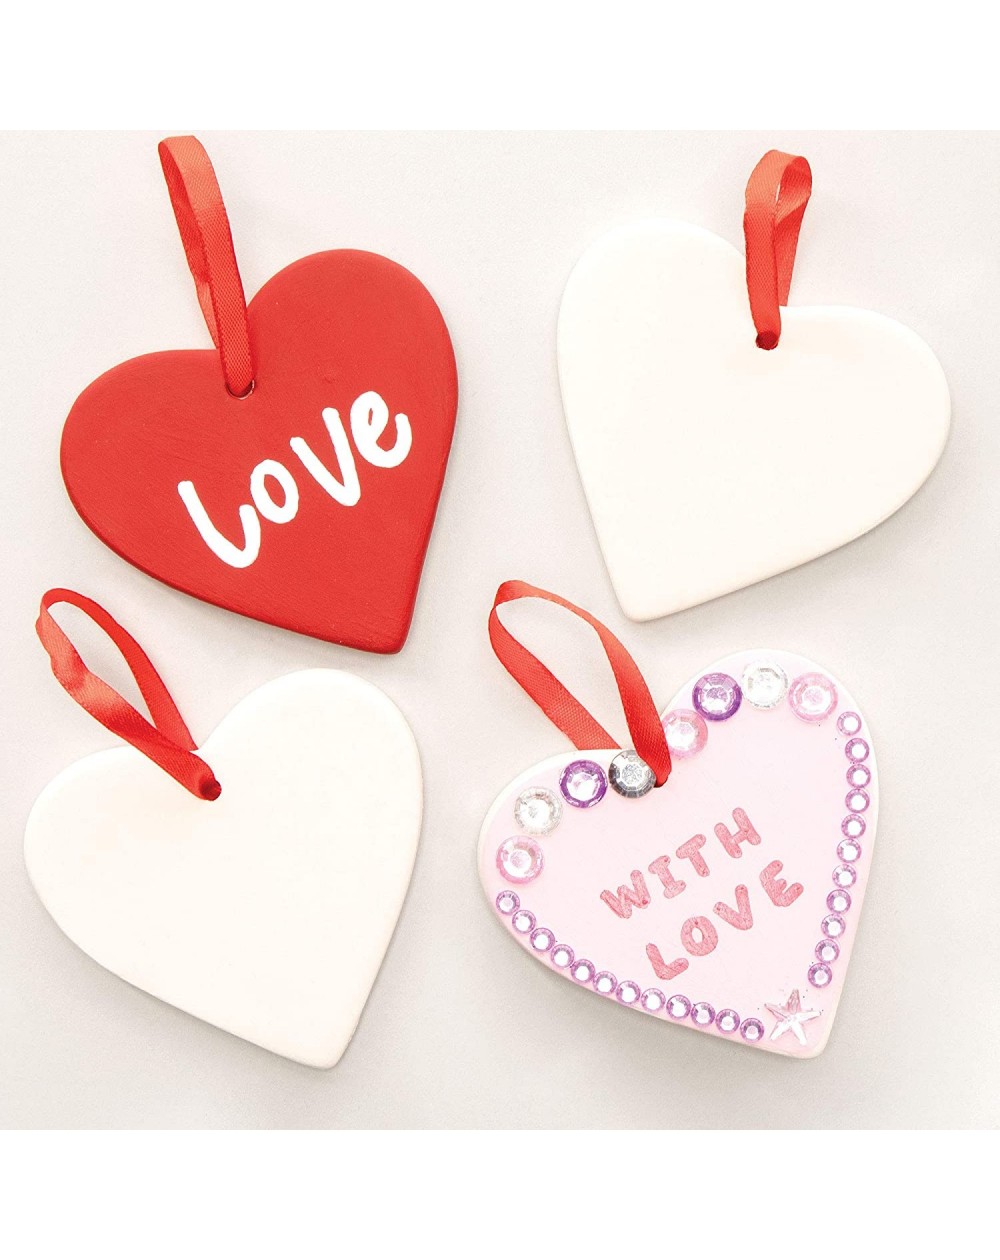 Ornaments EV5425 Hanging Ceramic Heart Ornaments - Pack of 5- for Kids to Paint- Decorate and Display - Ceramic - CG18O33EEY6...